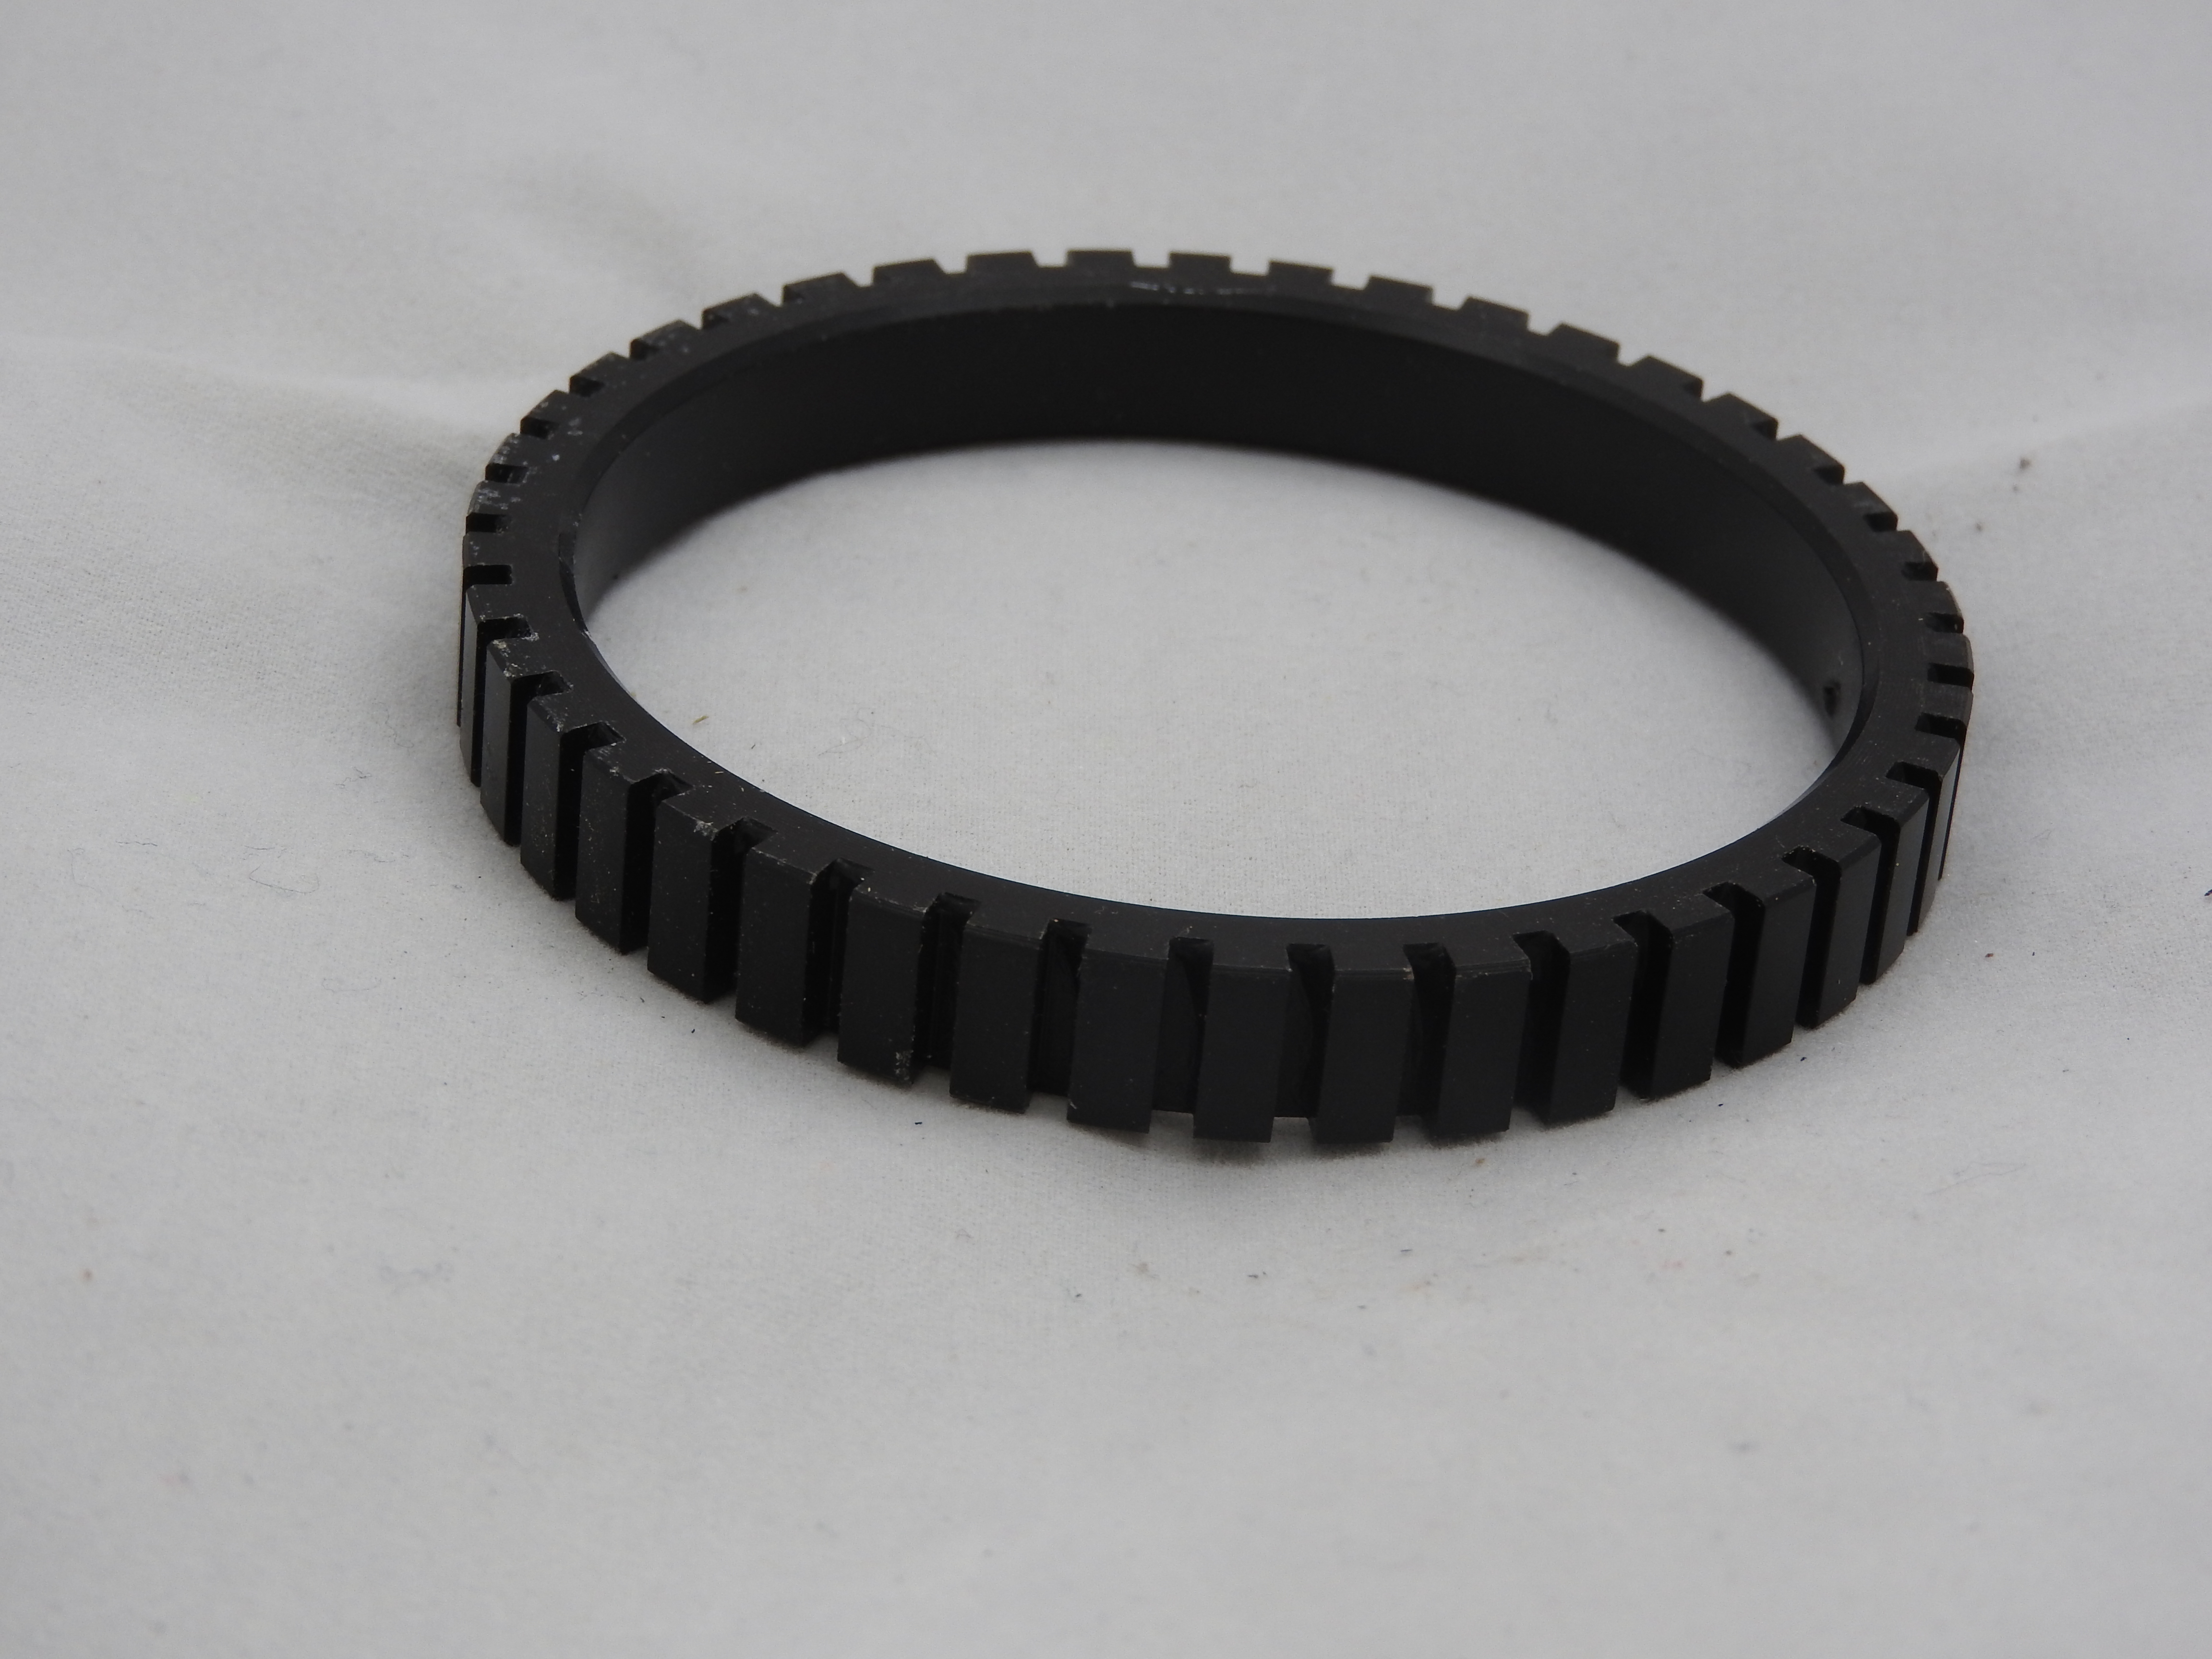 Abs ring (reluctor ring) at low cost in online store